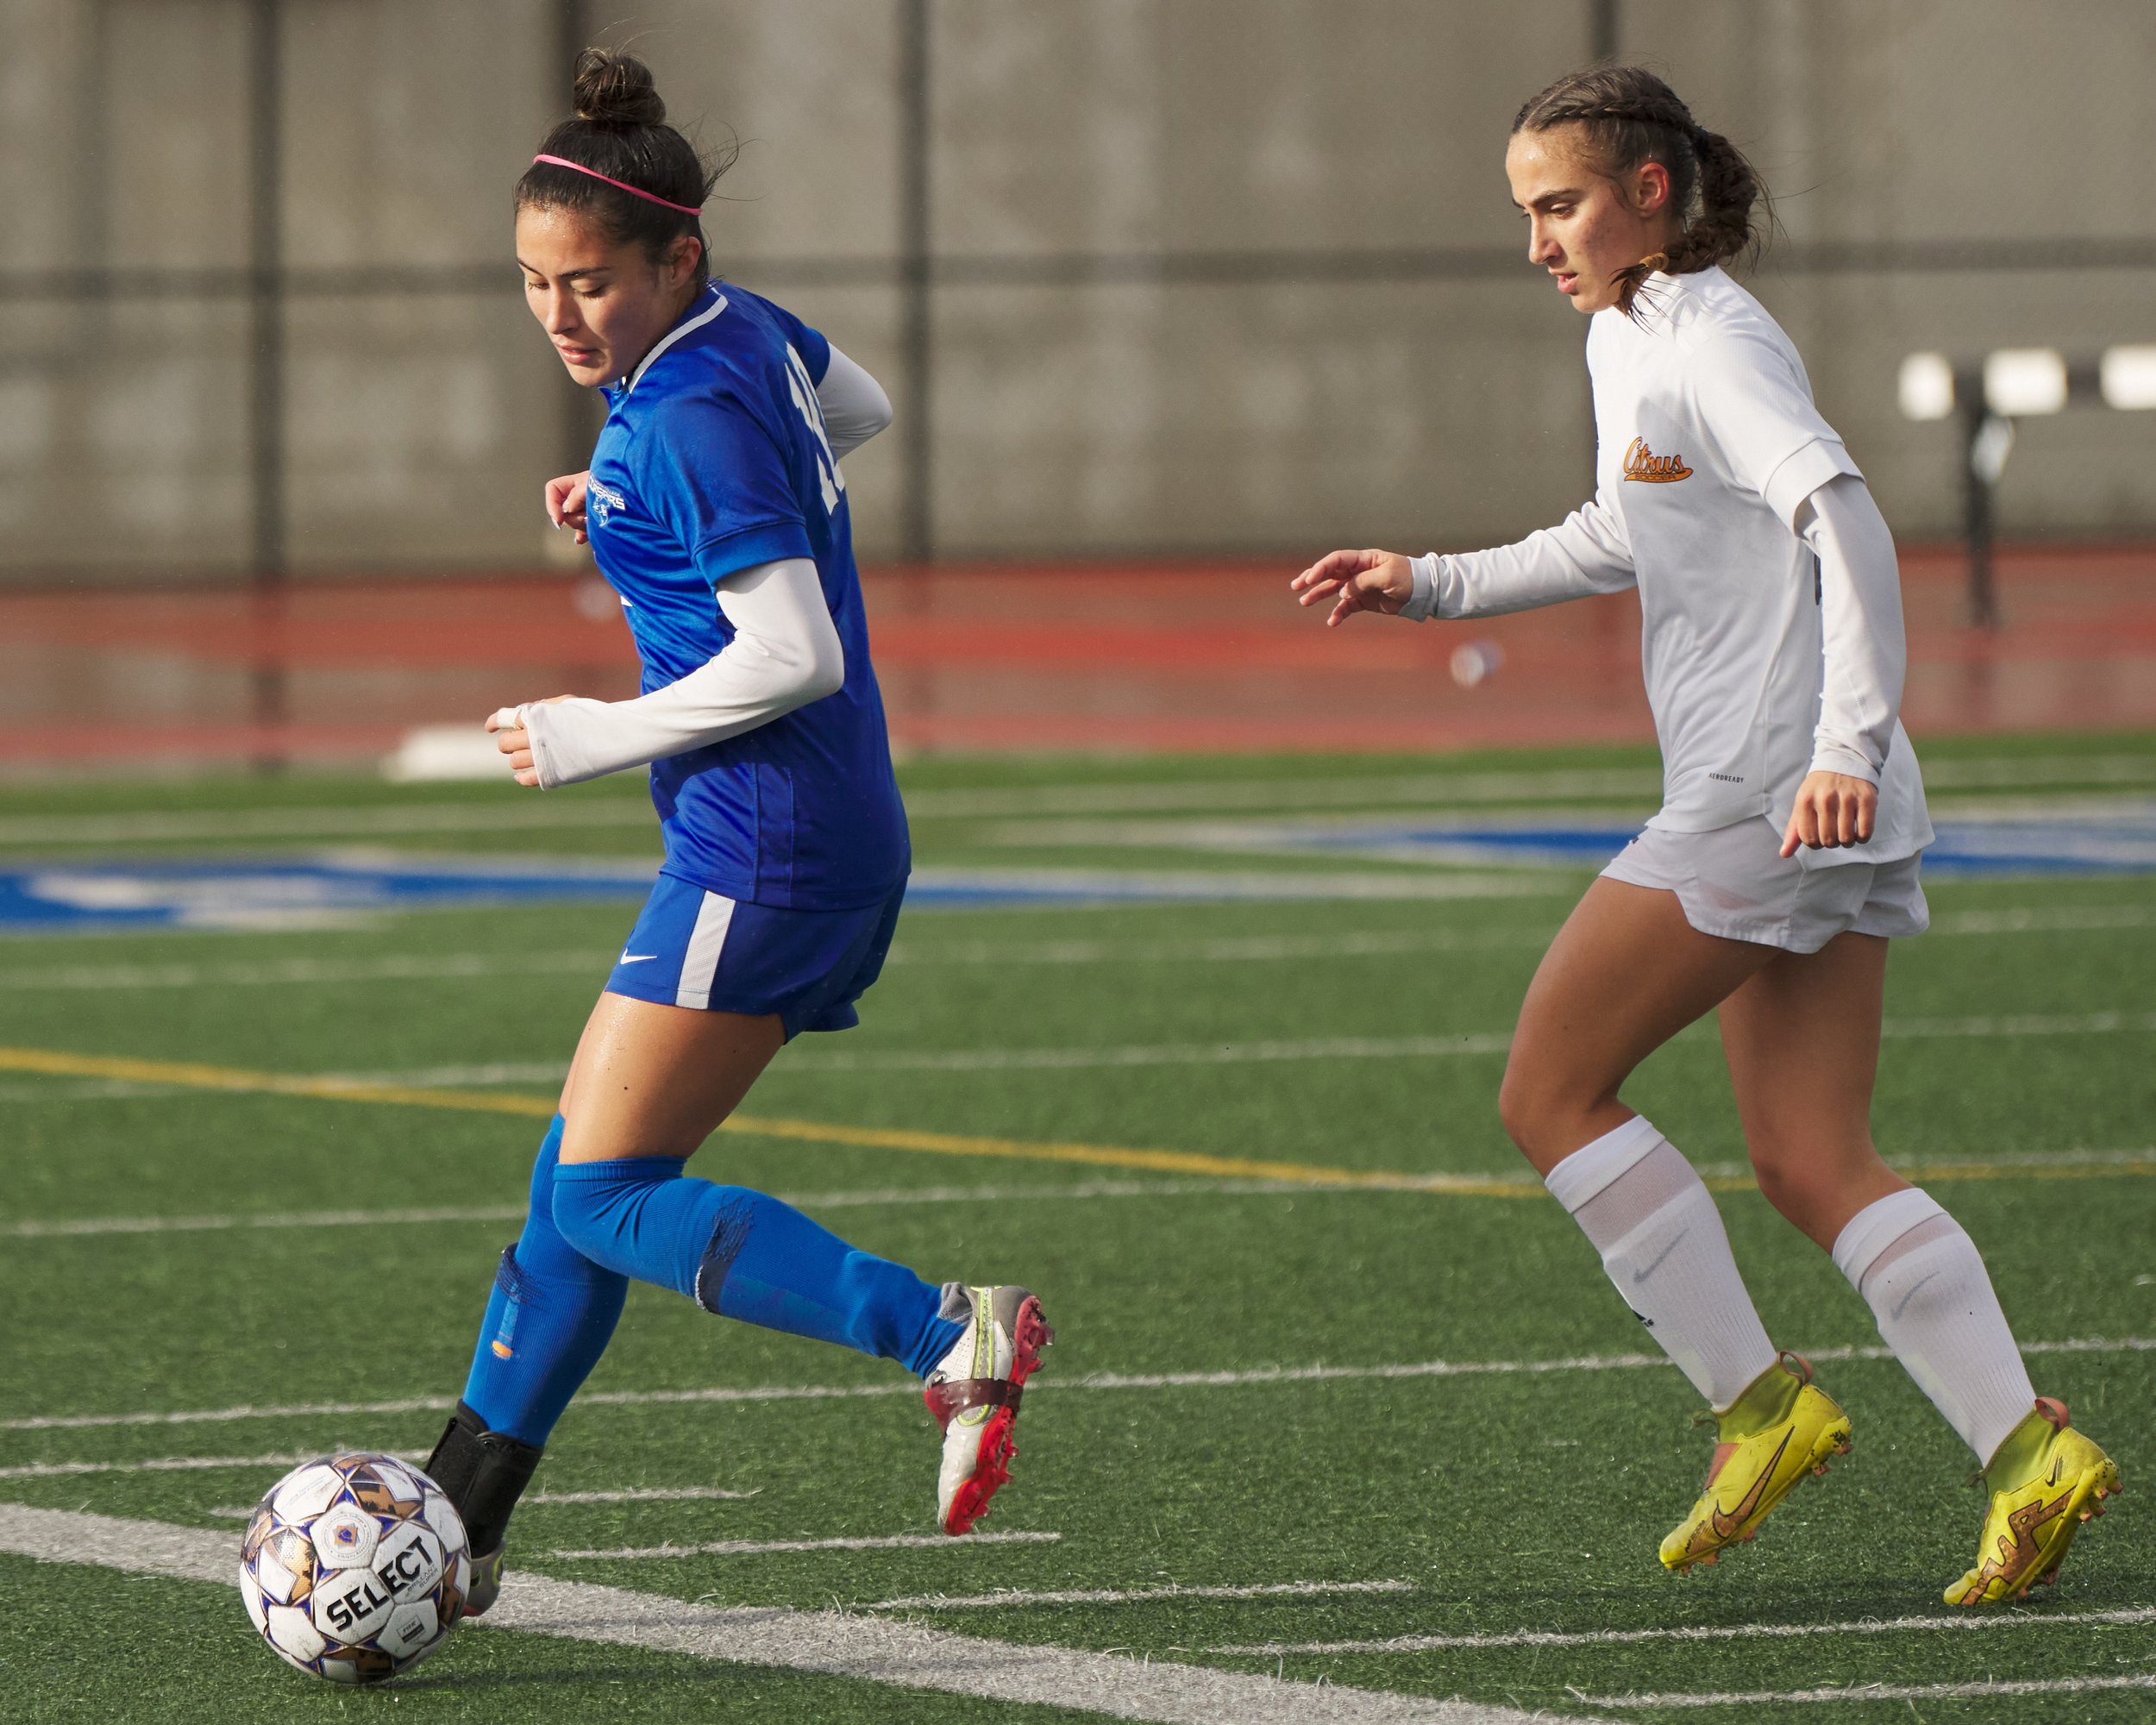  Santa Monica College Corsairs' Ali Alban and Citrus College Owls' Giovanna Romera Damiani during the women's soccer match on Tuesday, Nov. 8, 2022, at Corsair Field in Santa Monica, Calif. The Corsairs won 3-1. (Nicholas McCall | The Corsair) 